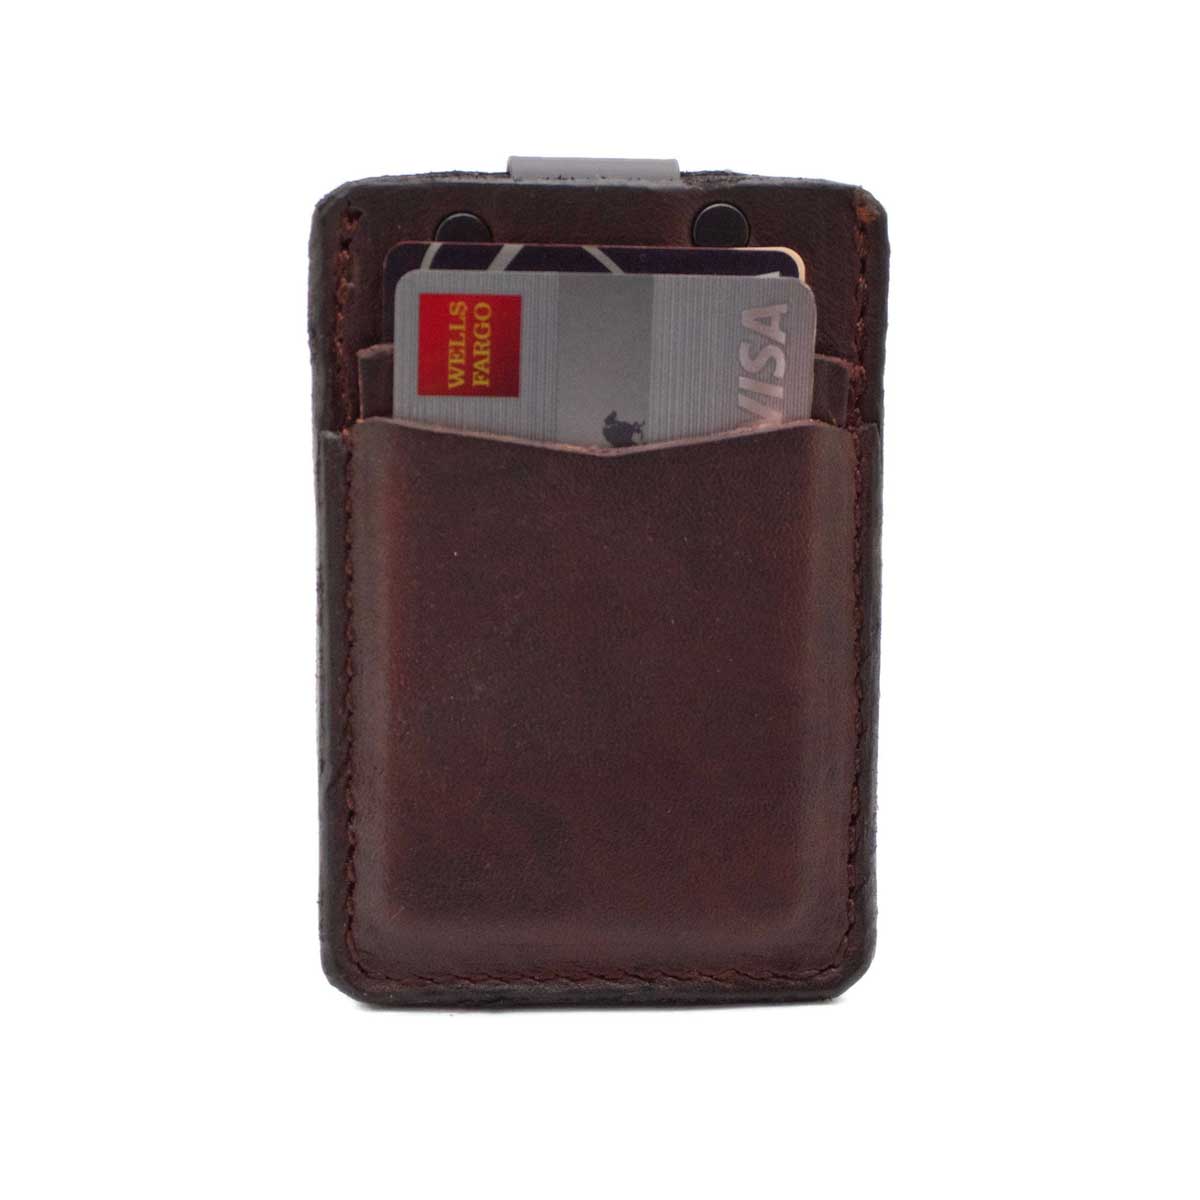 Front 2 pockets of mahogany minimalist wallet with cards in pockets